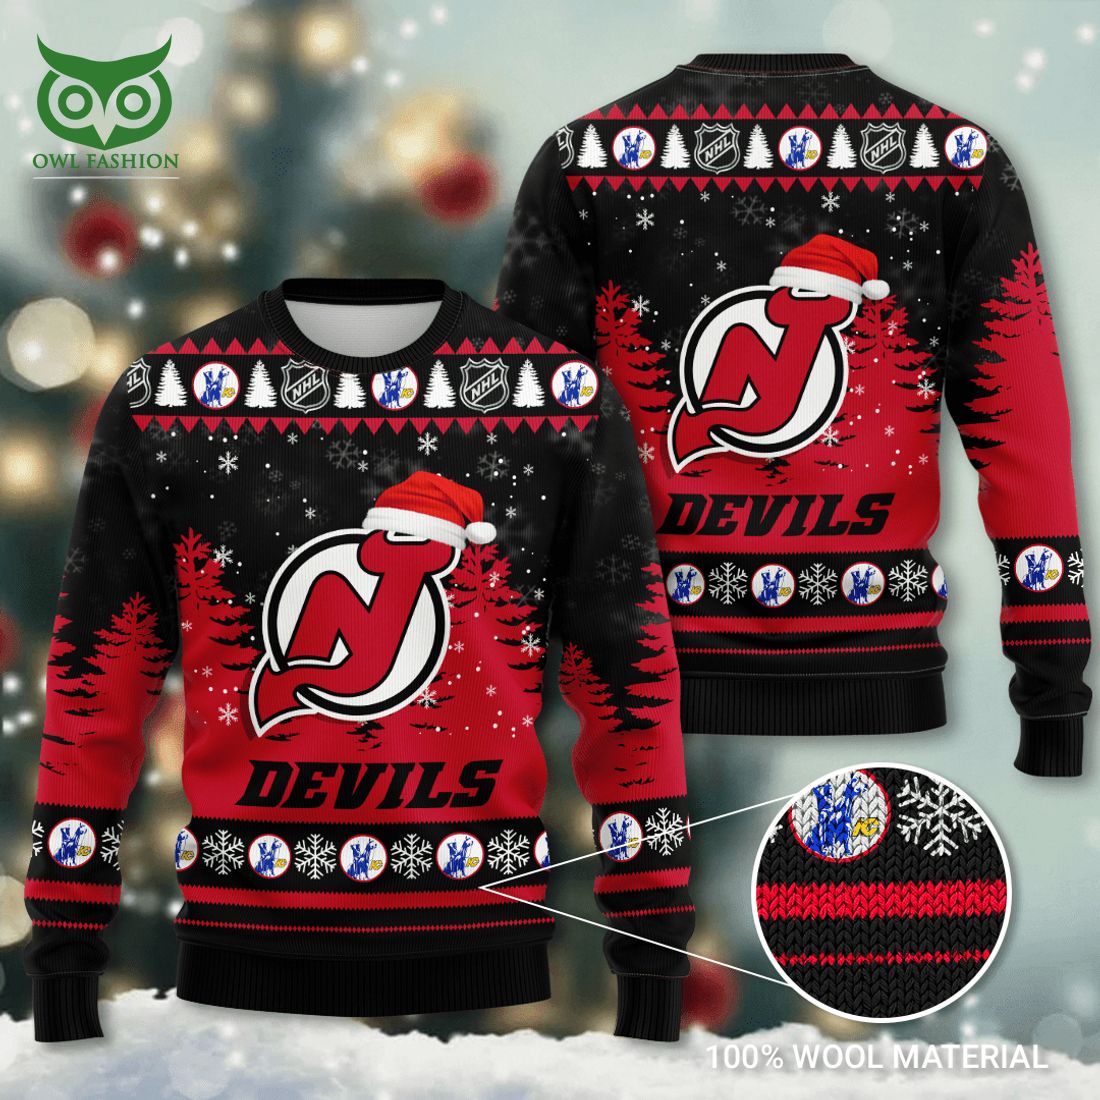 new jersey devils nhl ice hockey 3d ugly sweater 1 7r32y